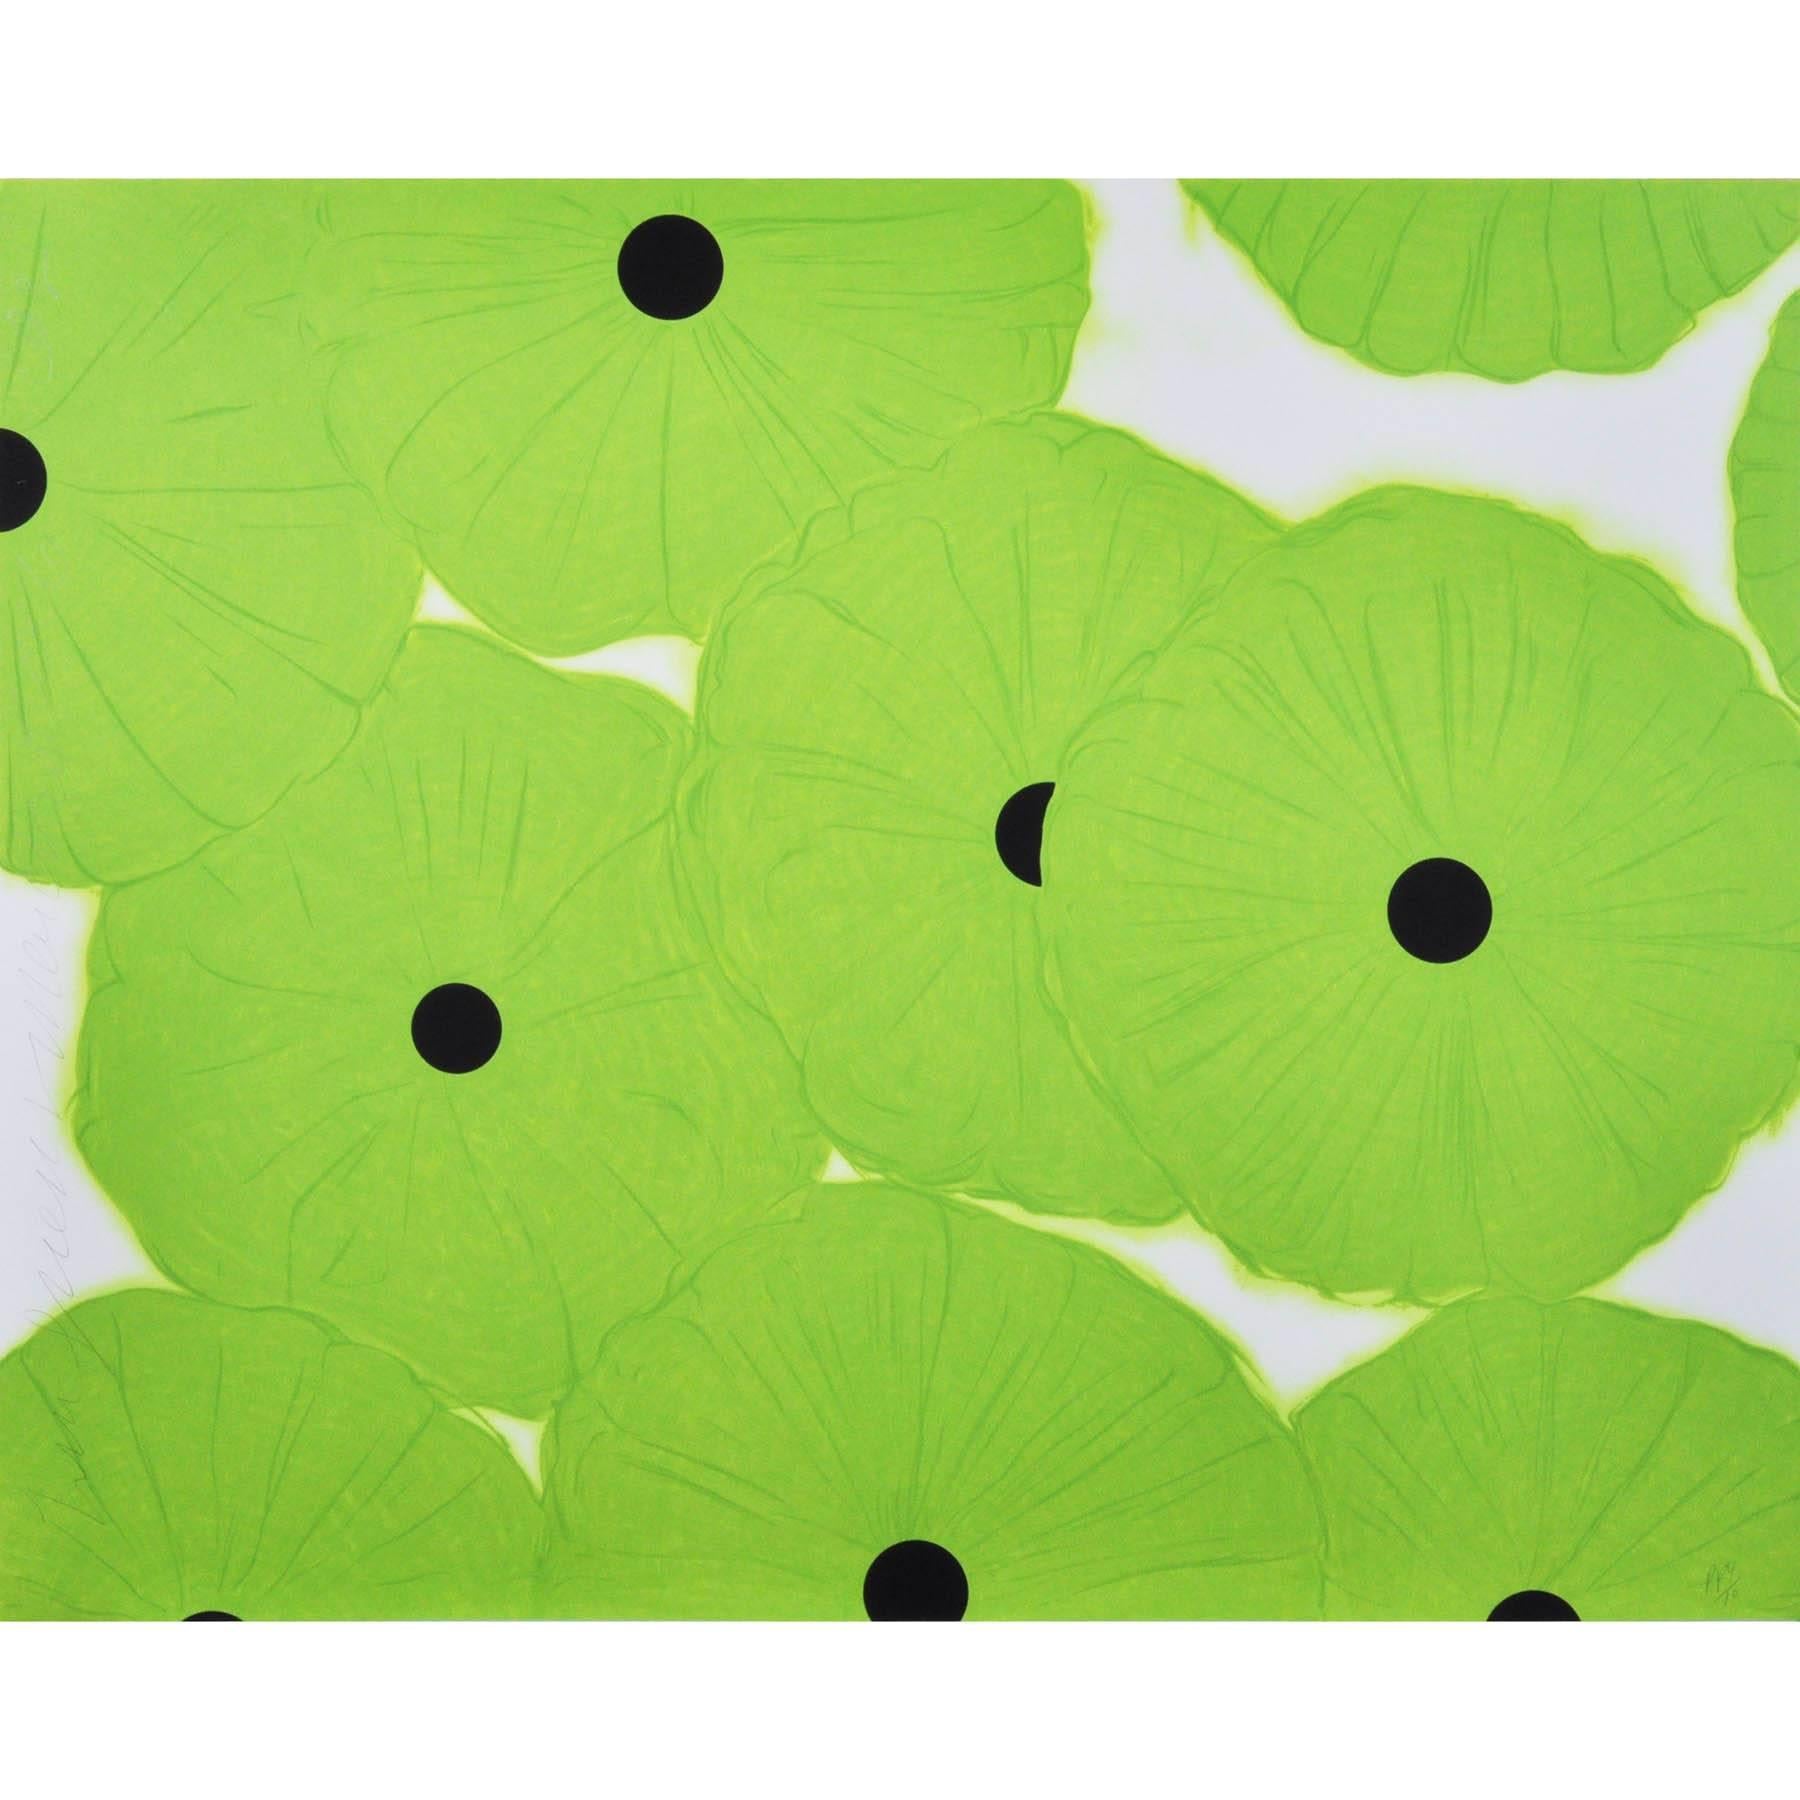 Ten Greens (Poppies) - Print by Donald Sultan